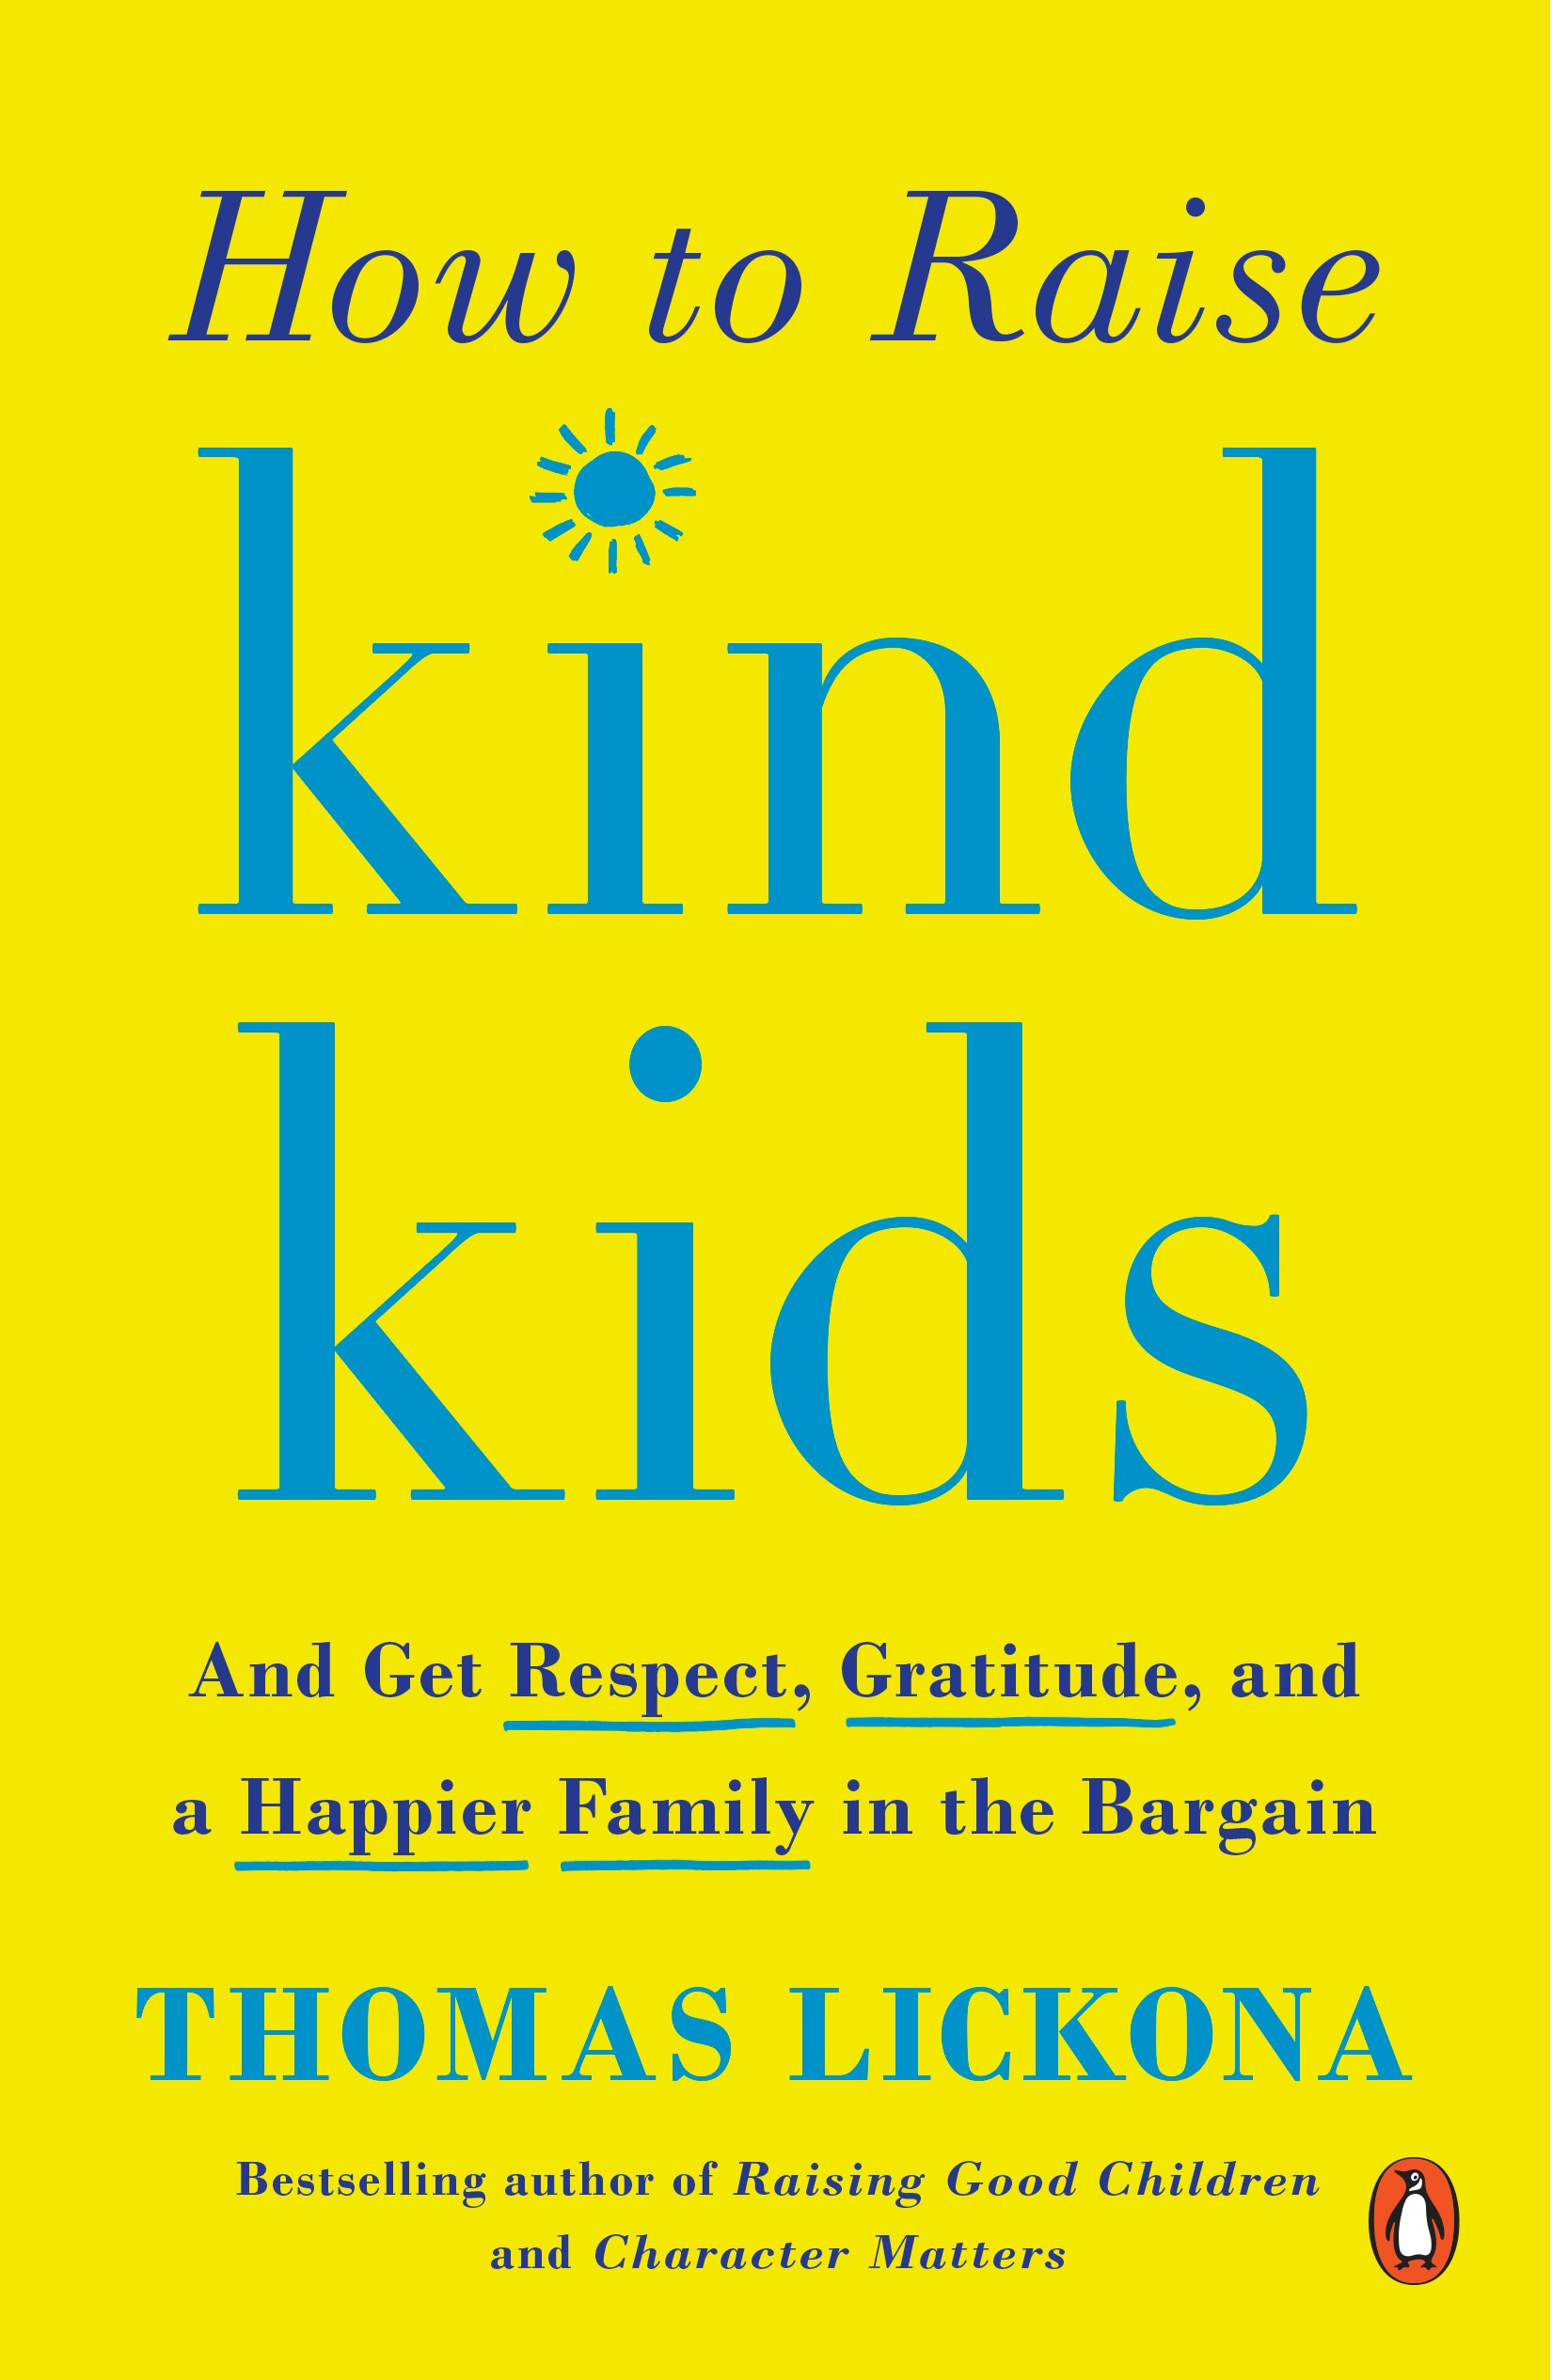 How to Raise Kind Kids book cover